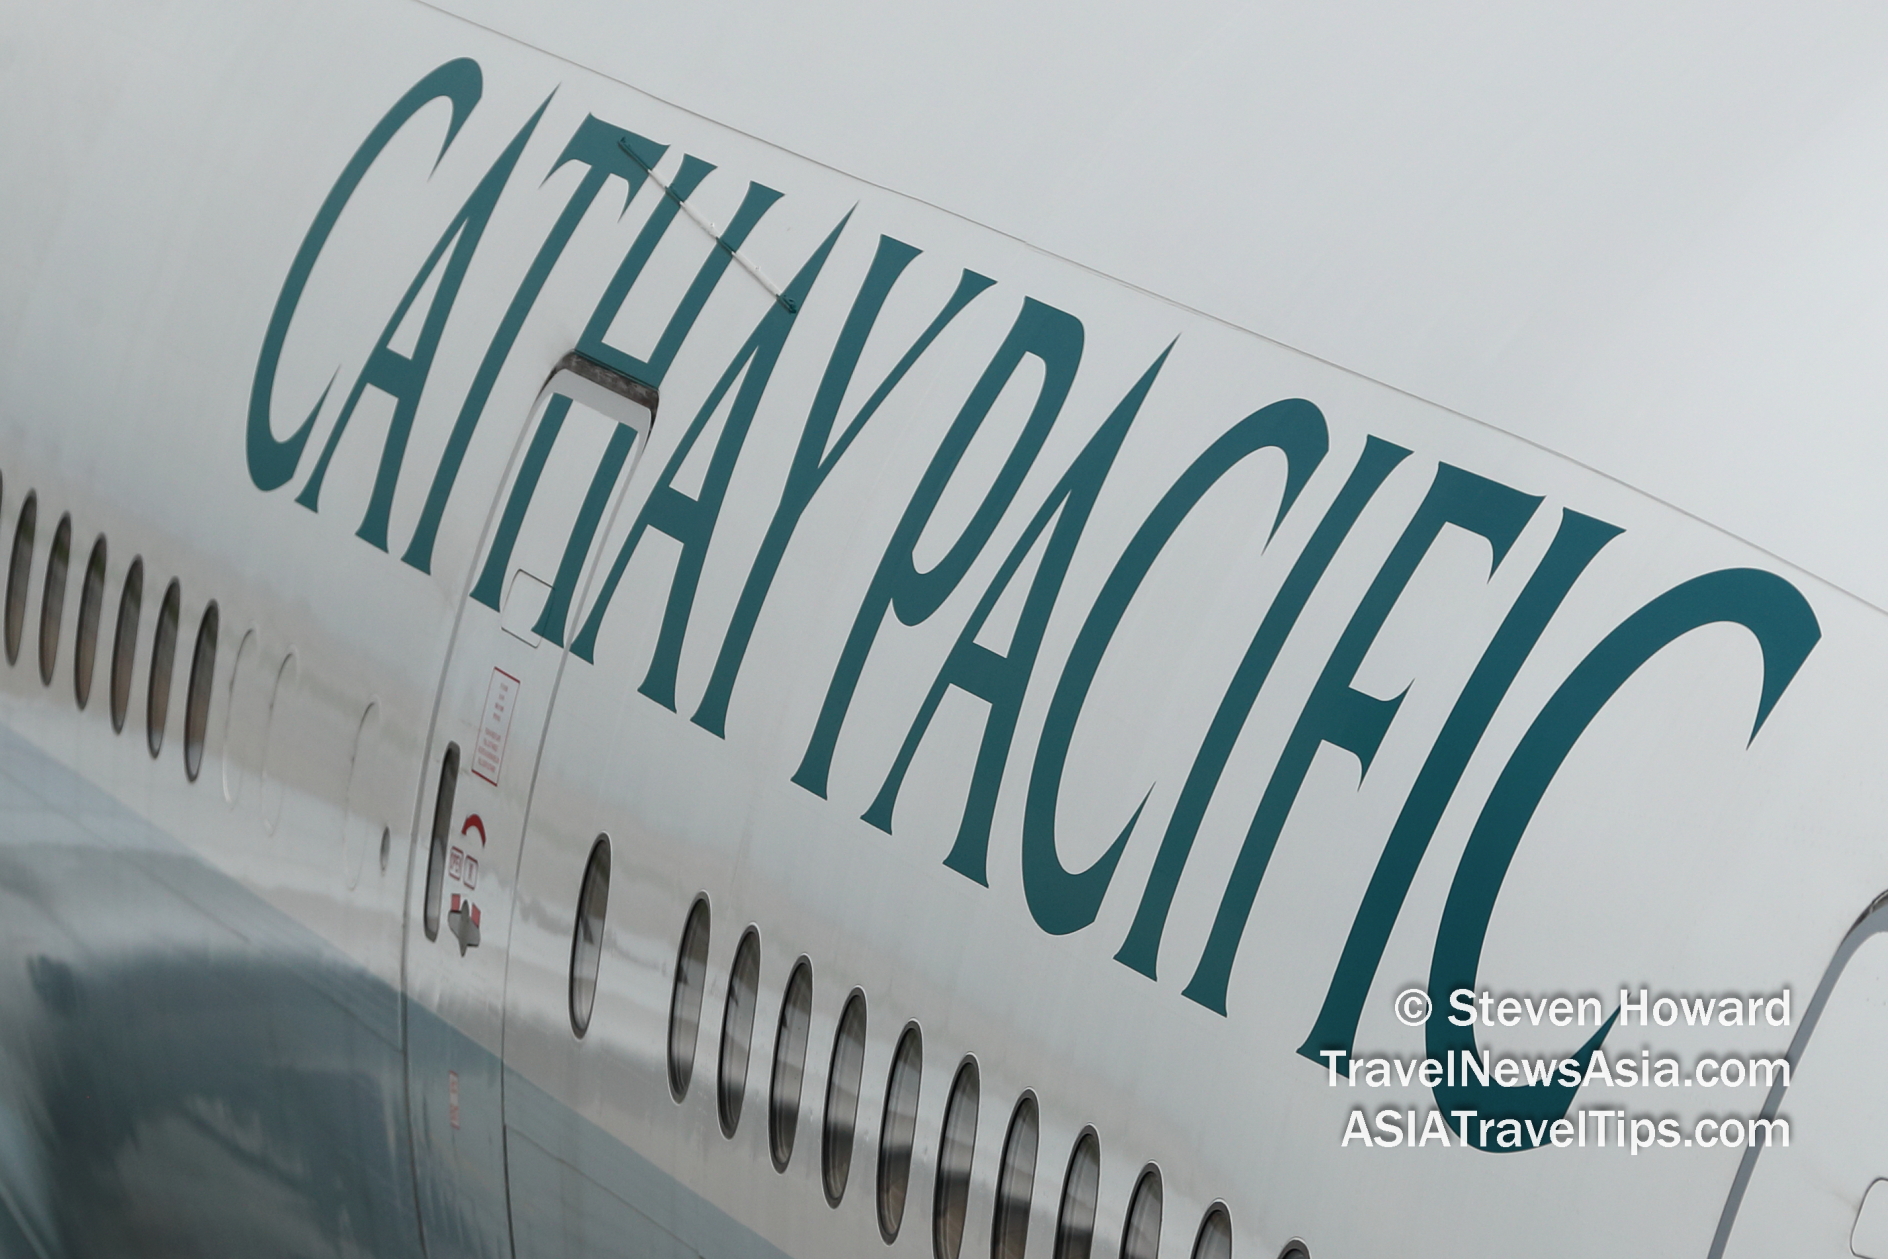 Cathay Pacific. Picture by Steven Howard of TravelNewsAsia.com Click to enlarge.